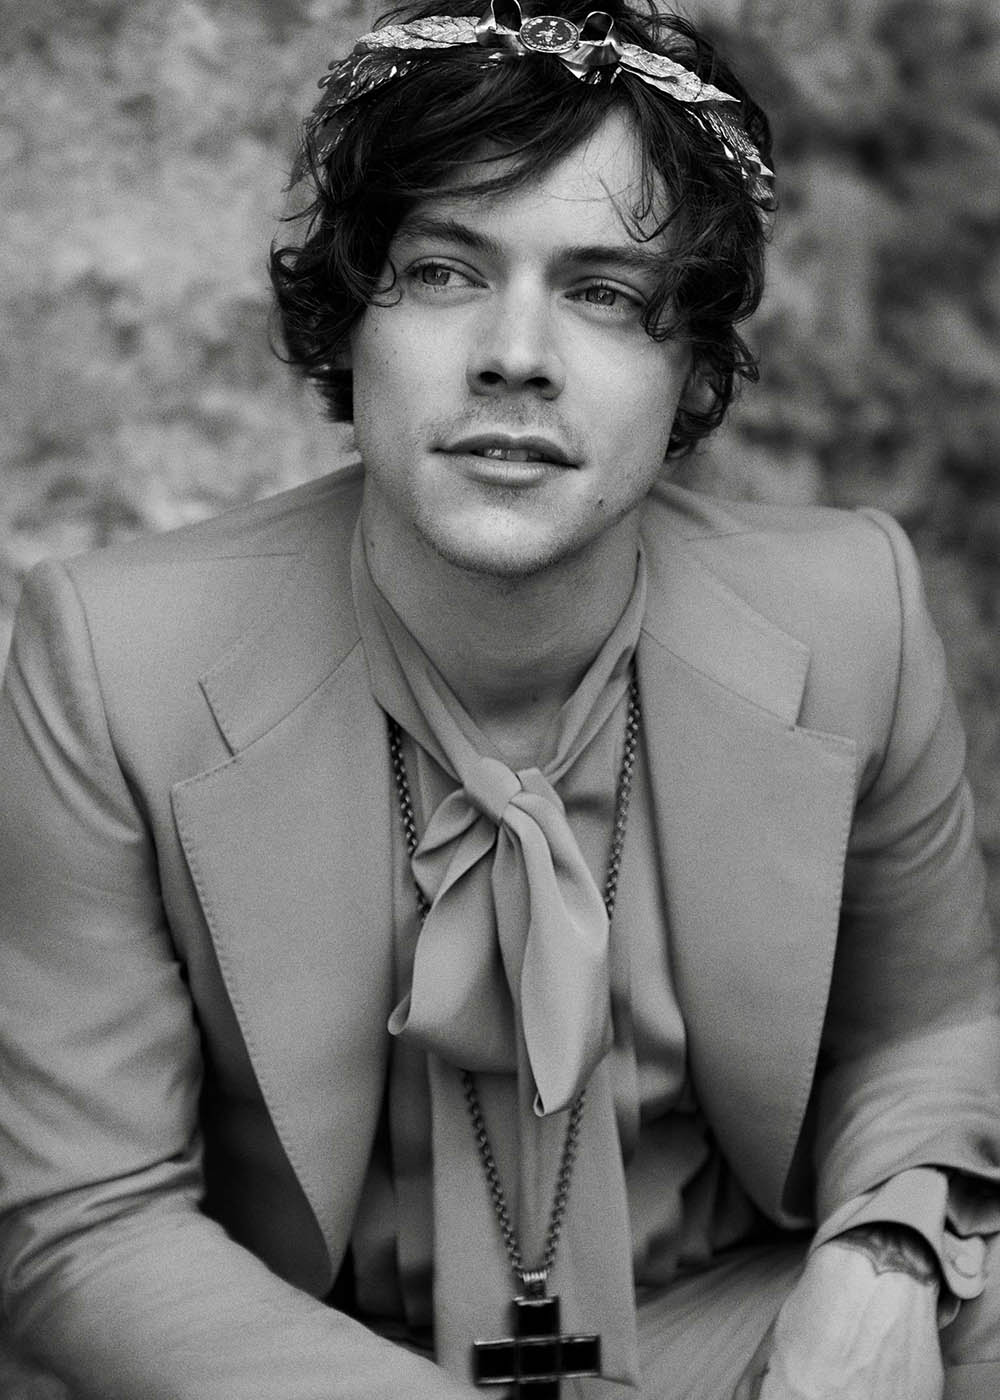 Gucci Cruise 2019 Men’s Tailoring Campaign with Harry Styles